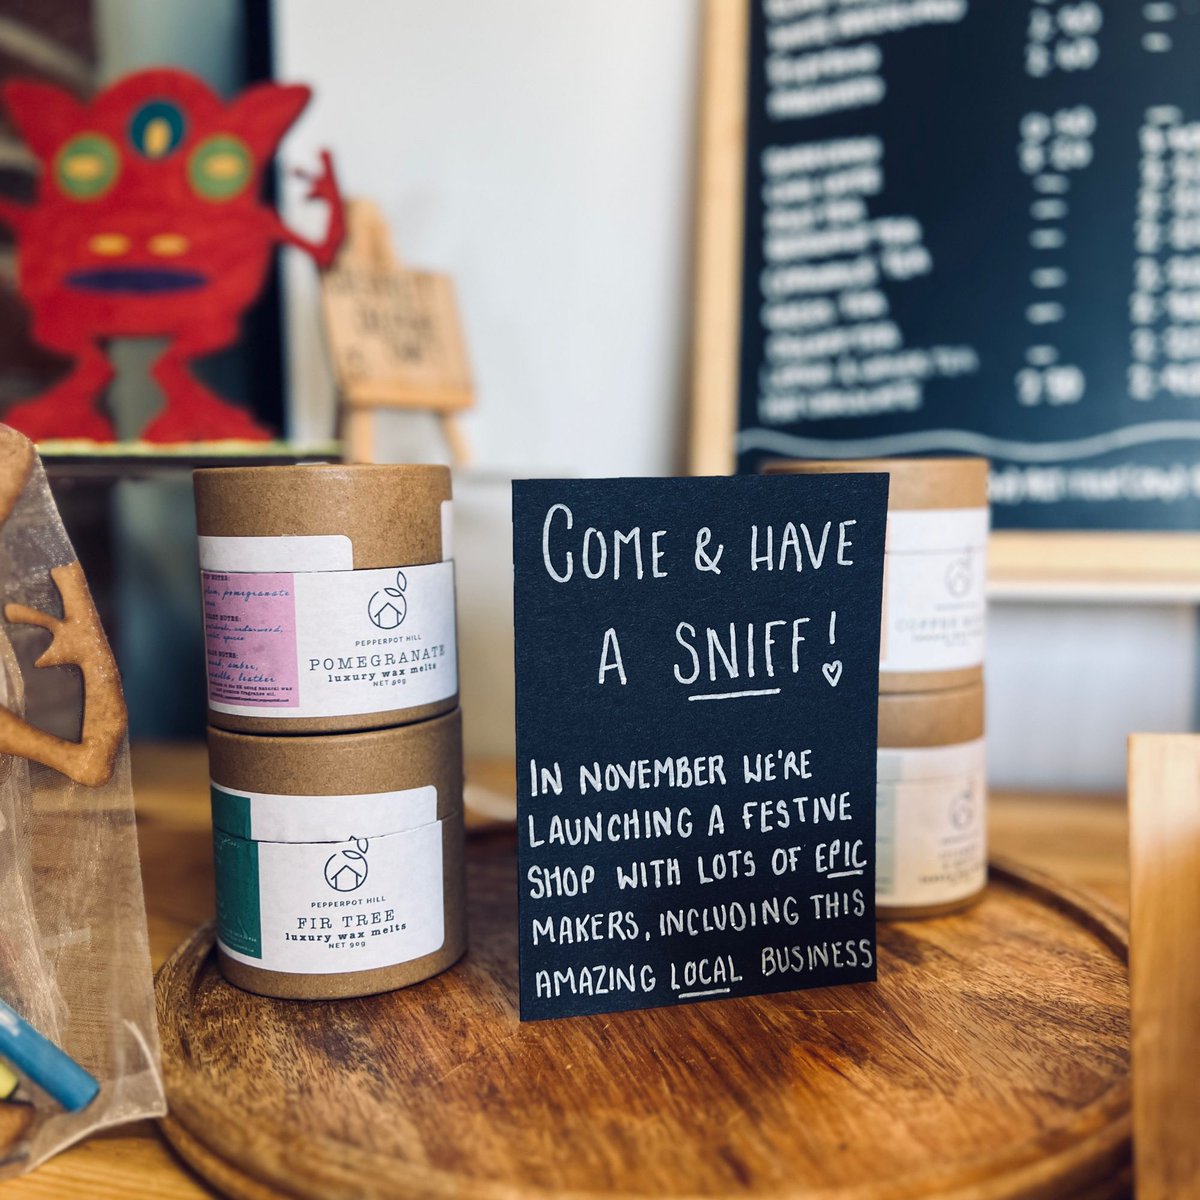 Really excited that our wax melt tubes will be part of a curated Christmas shop at The Inside TW coffee shop in #calverleypark from November. #tunbridgewells #shoplocal 
buff.ly/3JpdFwd